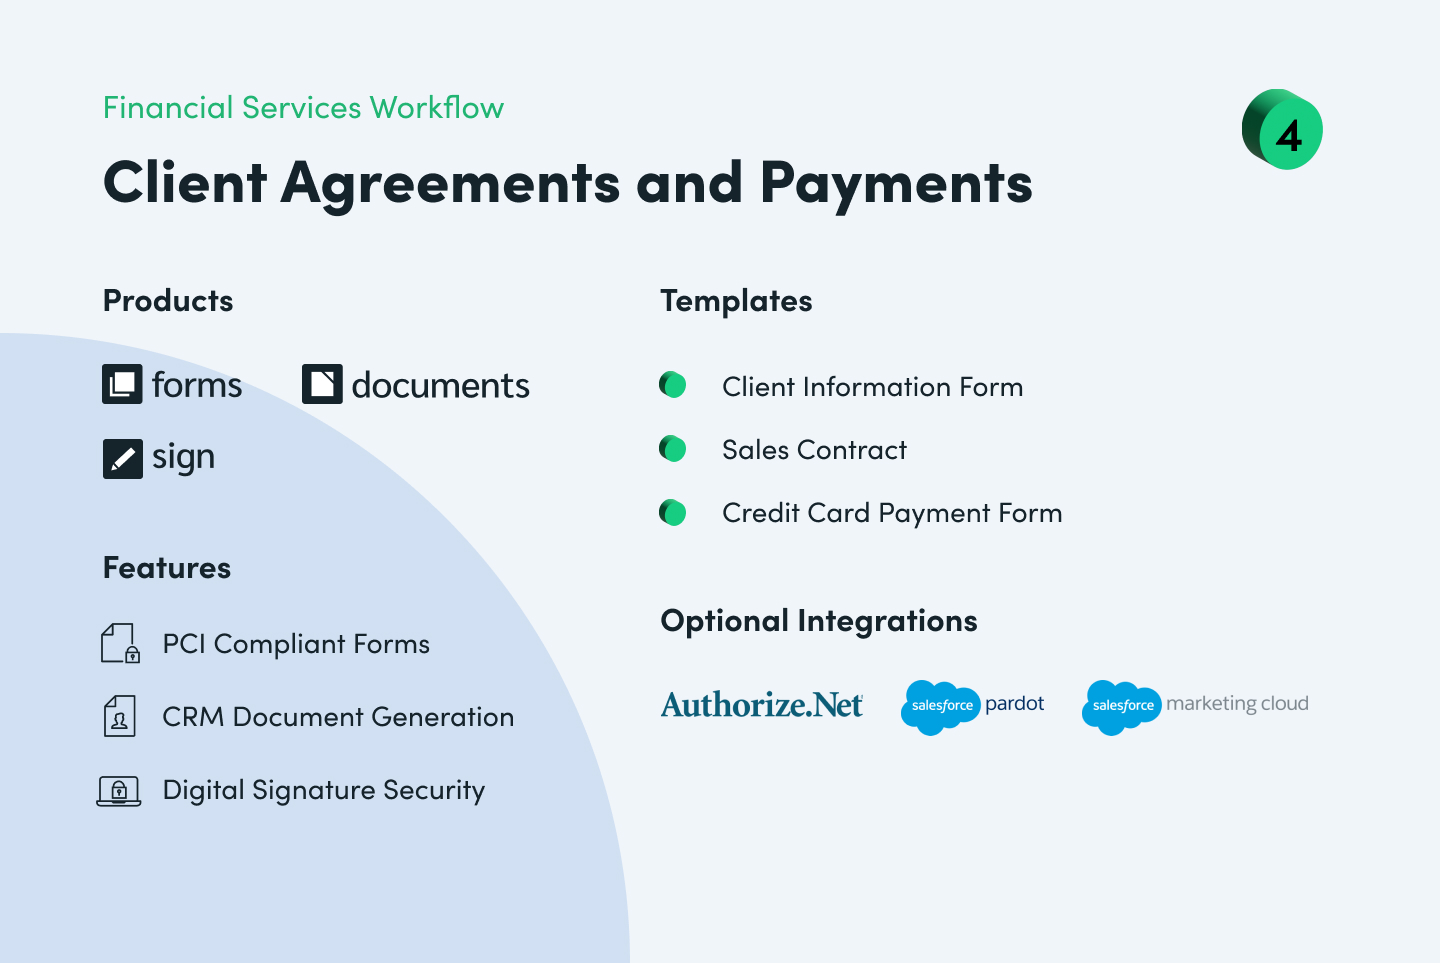 Financial Services Client Agreements and Payments Workflow Example